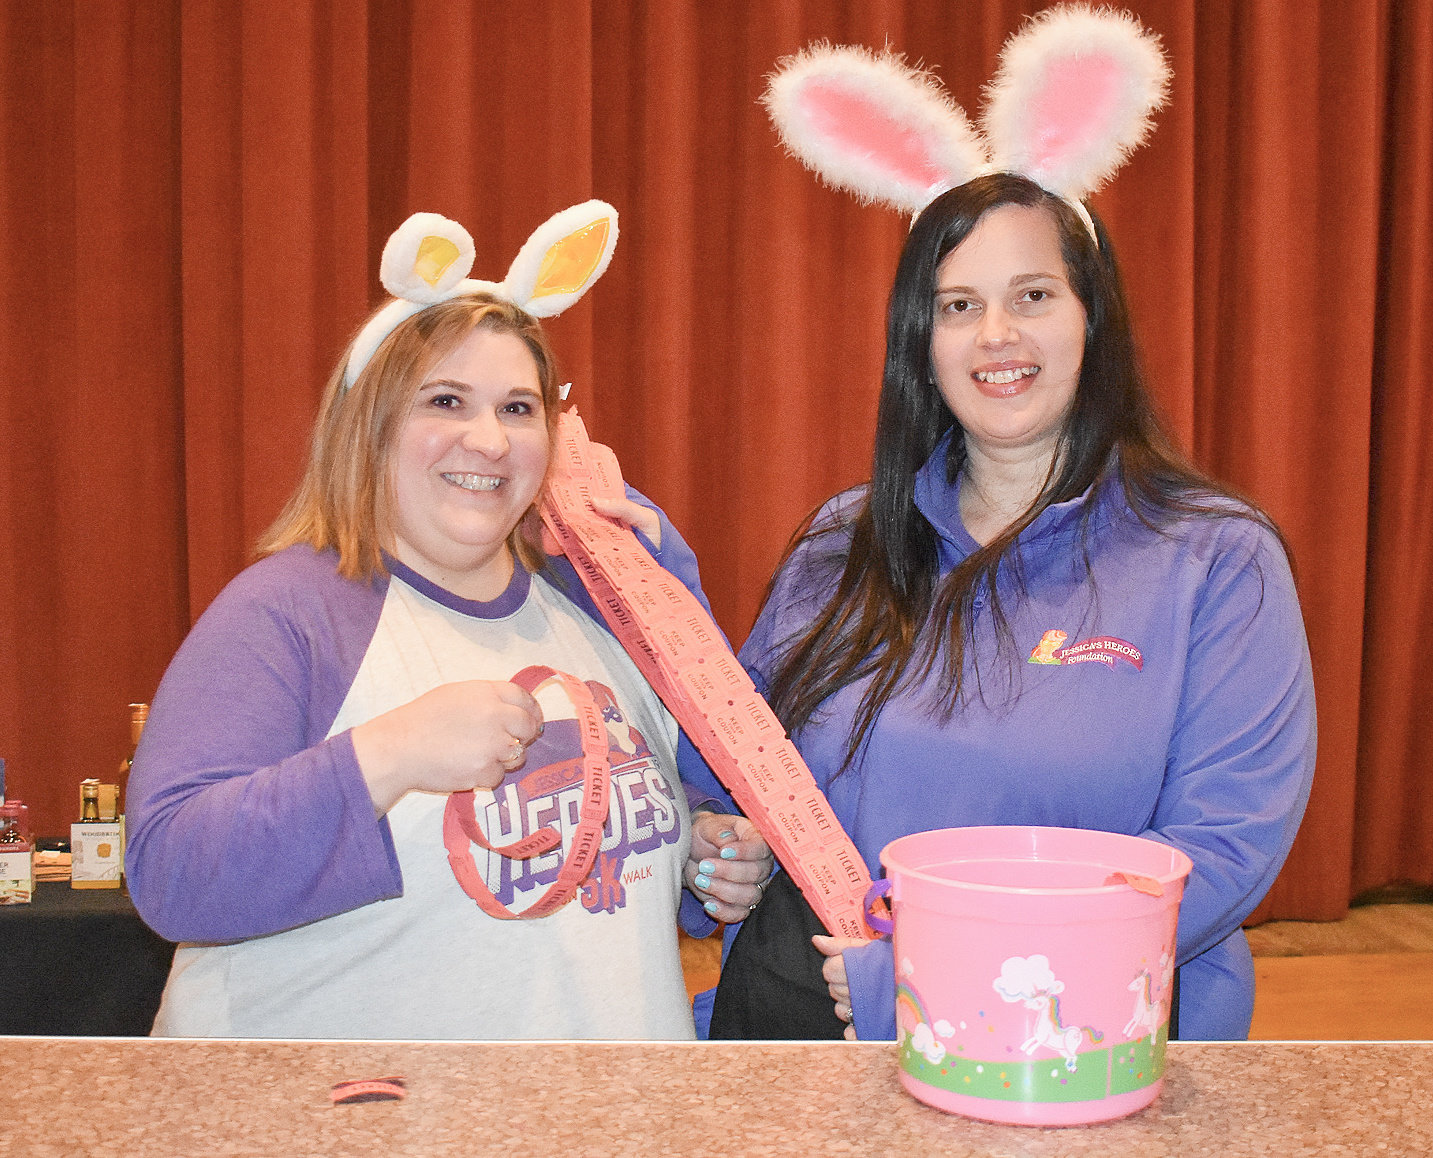 RAFFLE BASKETS — A 50/50 raffle was held at Jessica's Heroes Adult Easter Egg Hunt on April 9. Pictured are Jessica's Heroes Committee Members Brandy DuChene, left, and Shearen Grinnell holding a number of tickets being sold to attendees.